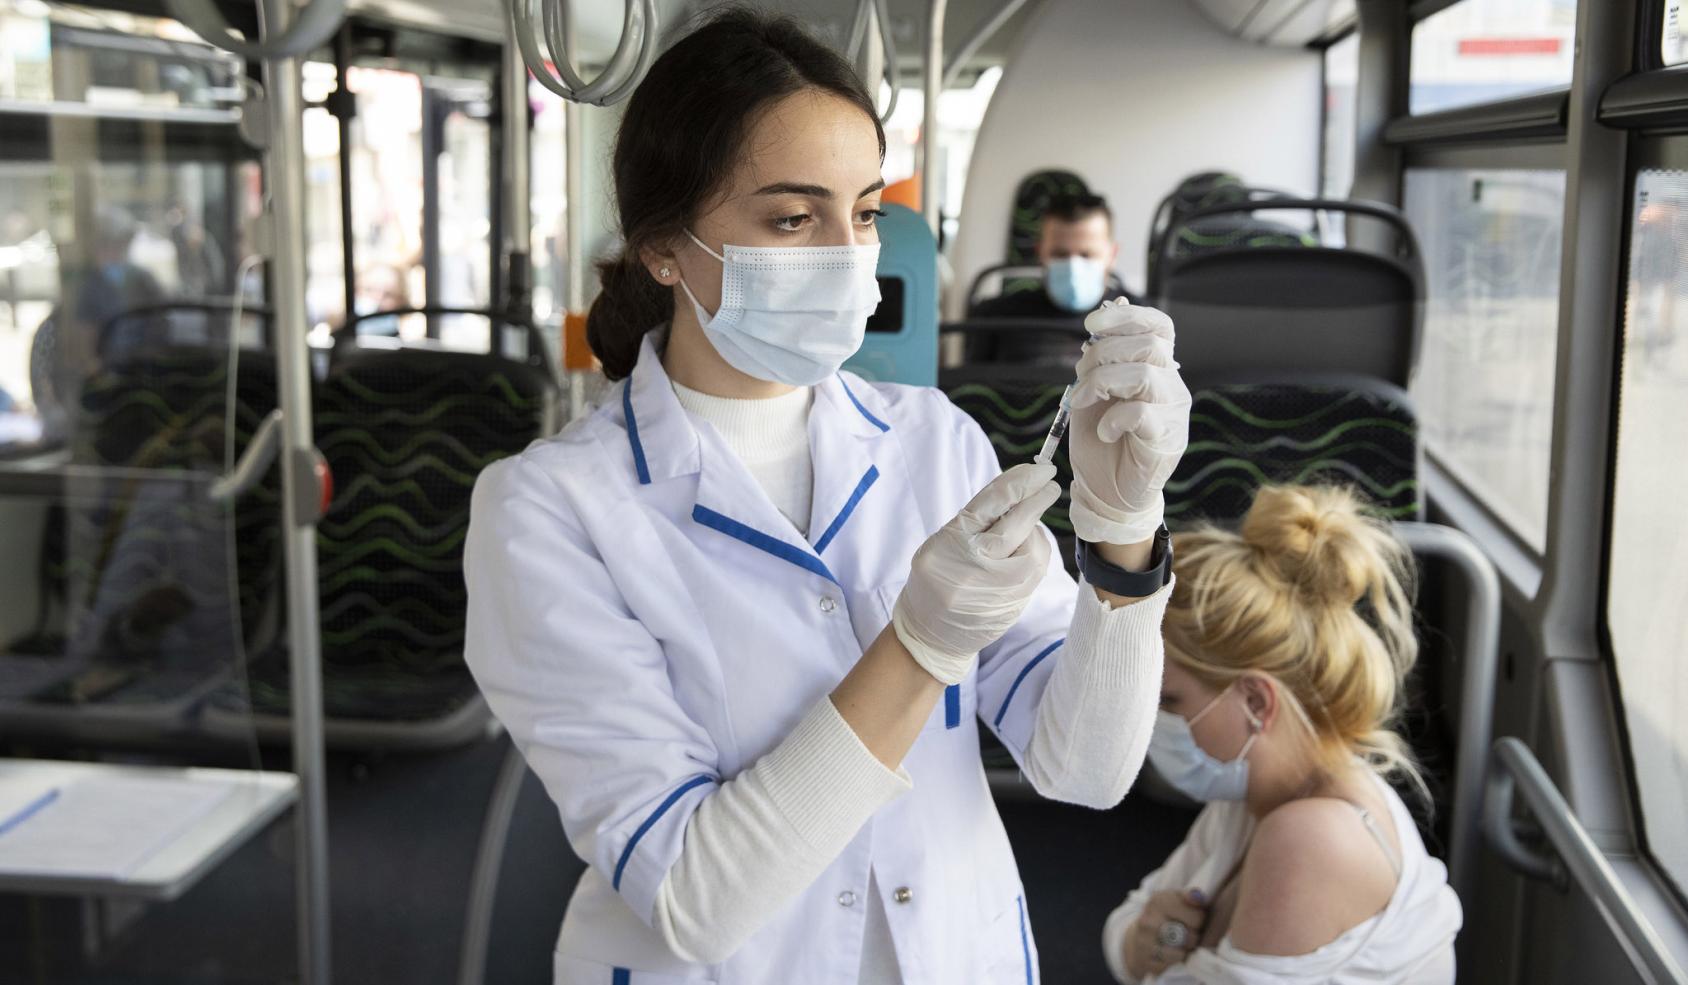 A healthcare worker prepares a COVID-19 vaccine for a patient on a dedicated vaccine bus.